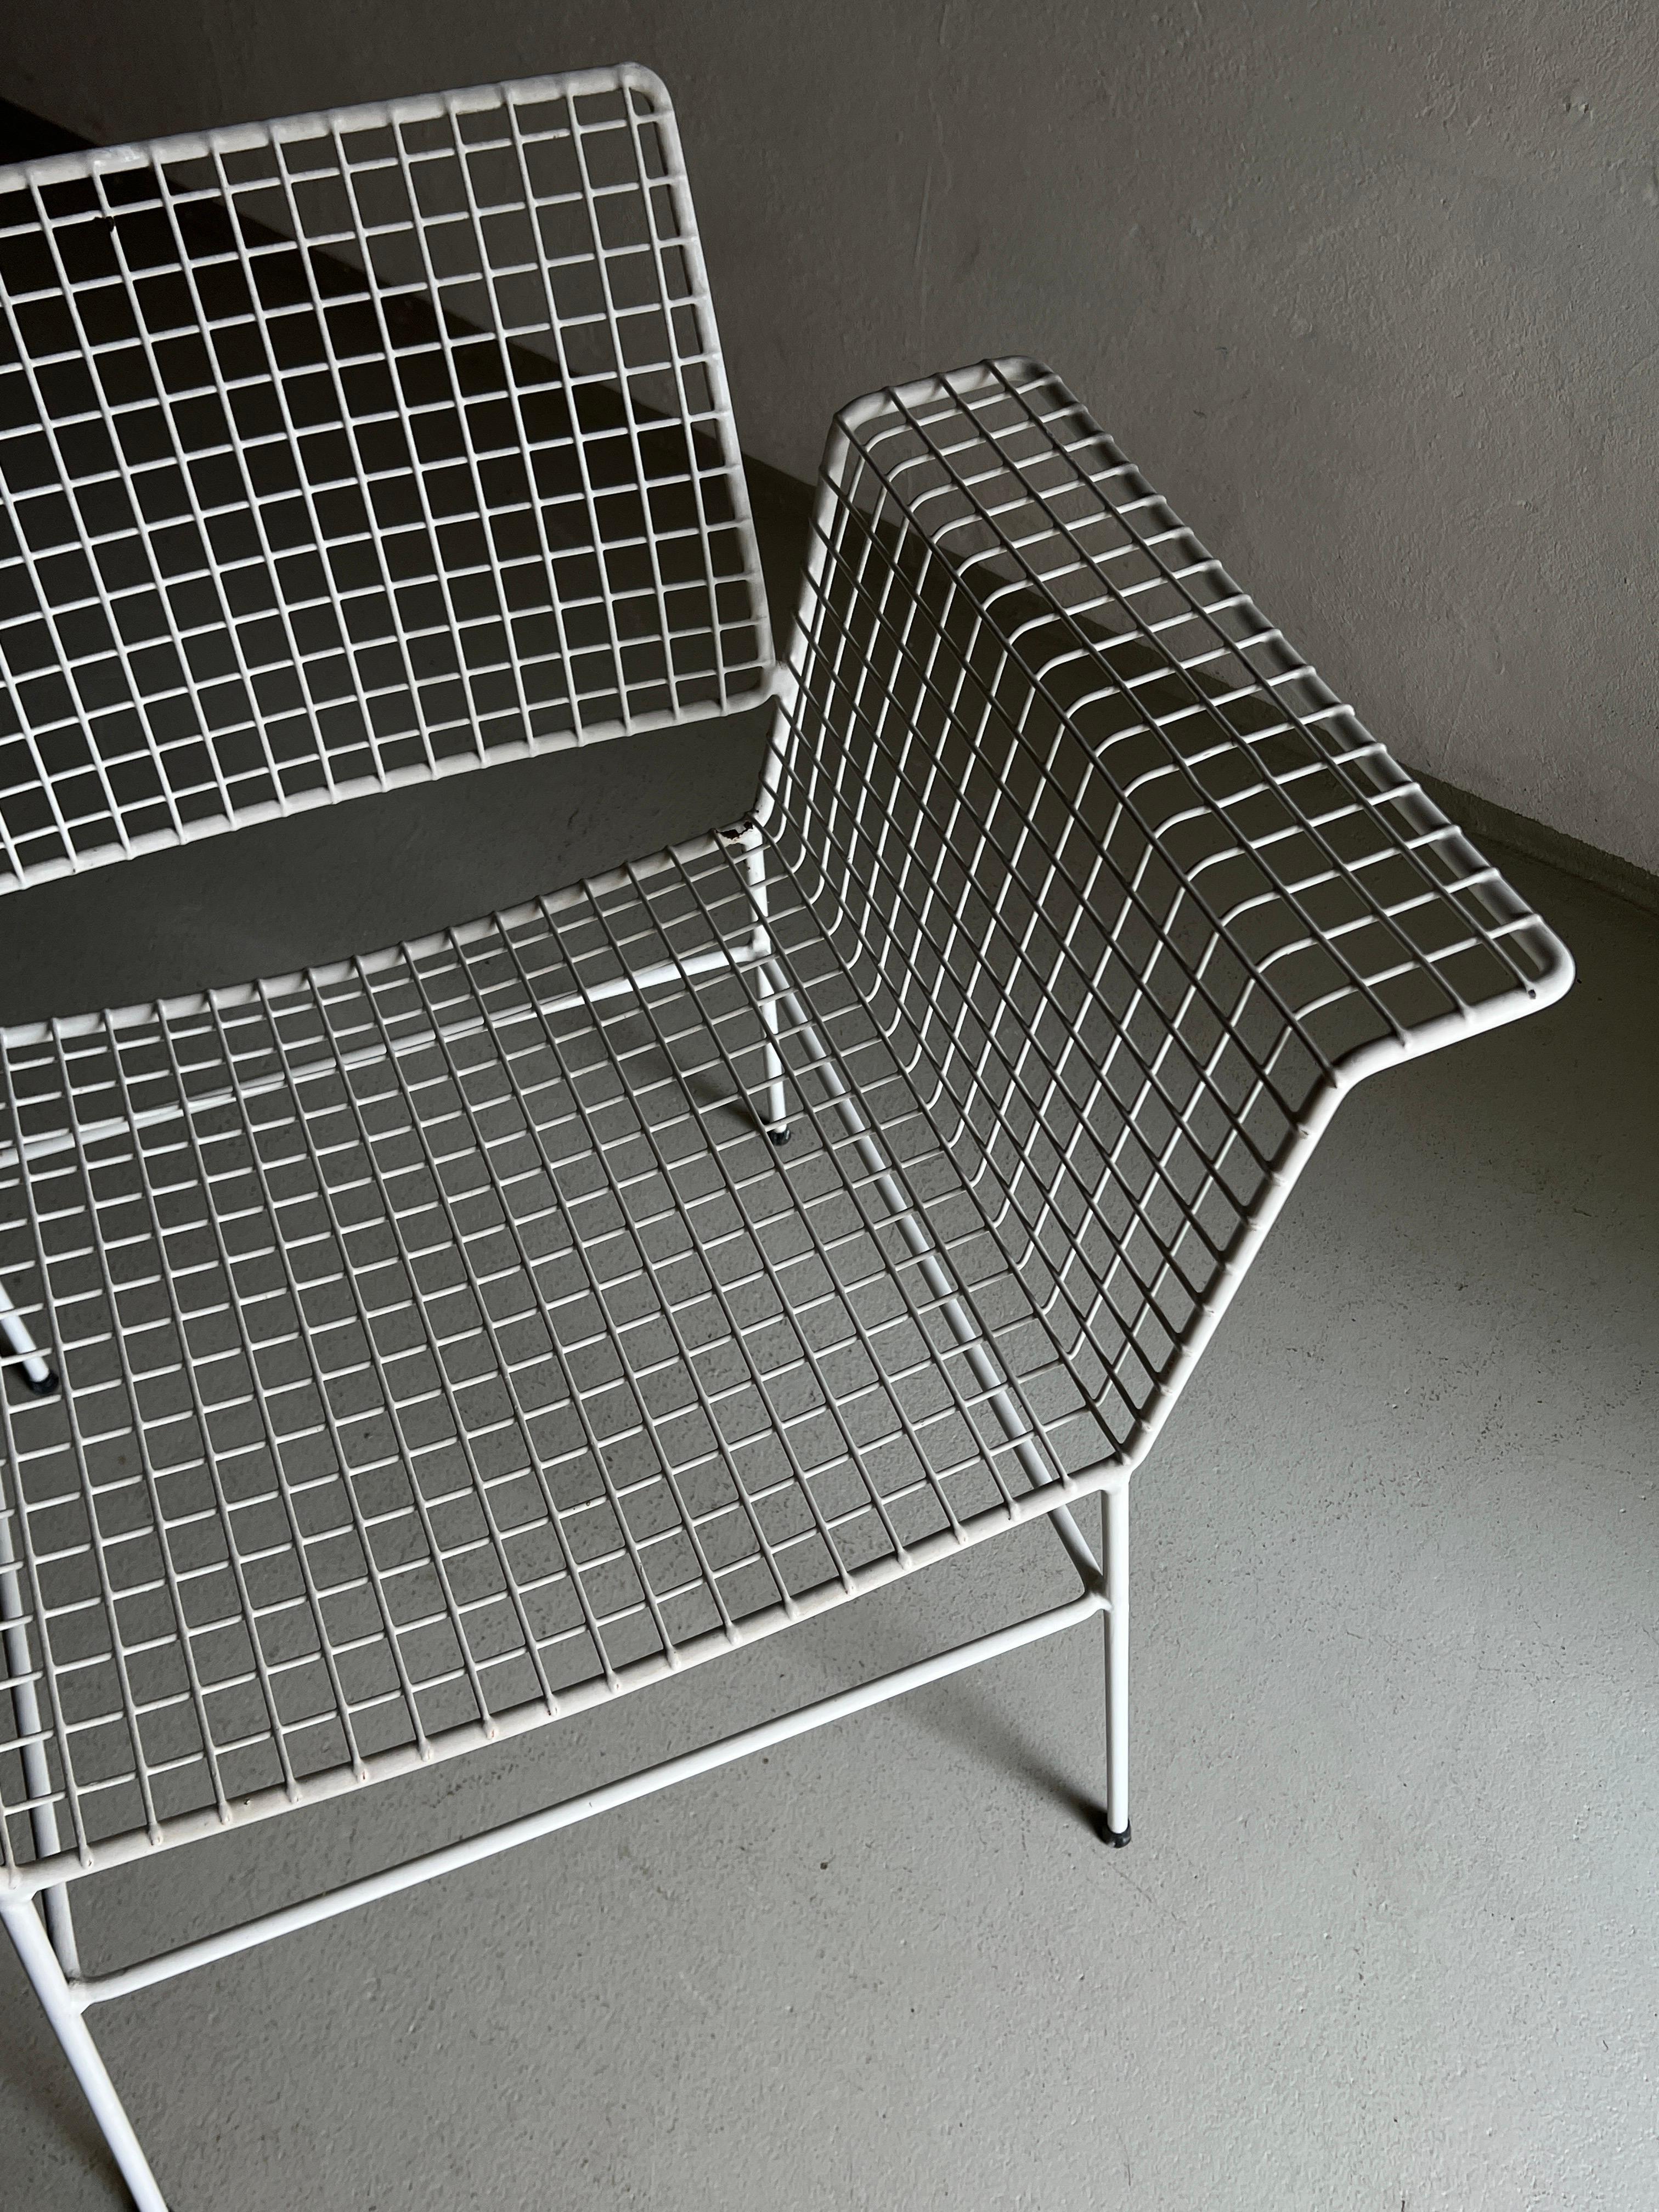 White Metal Wire Chair from Erlau Germany, 1960s For Sale 1